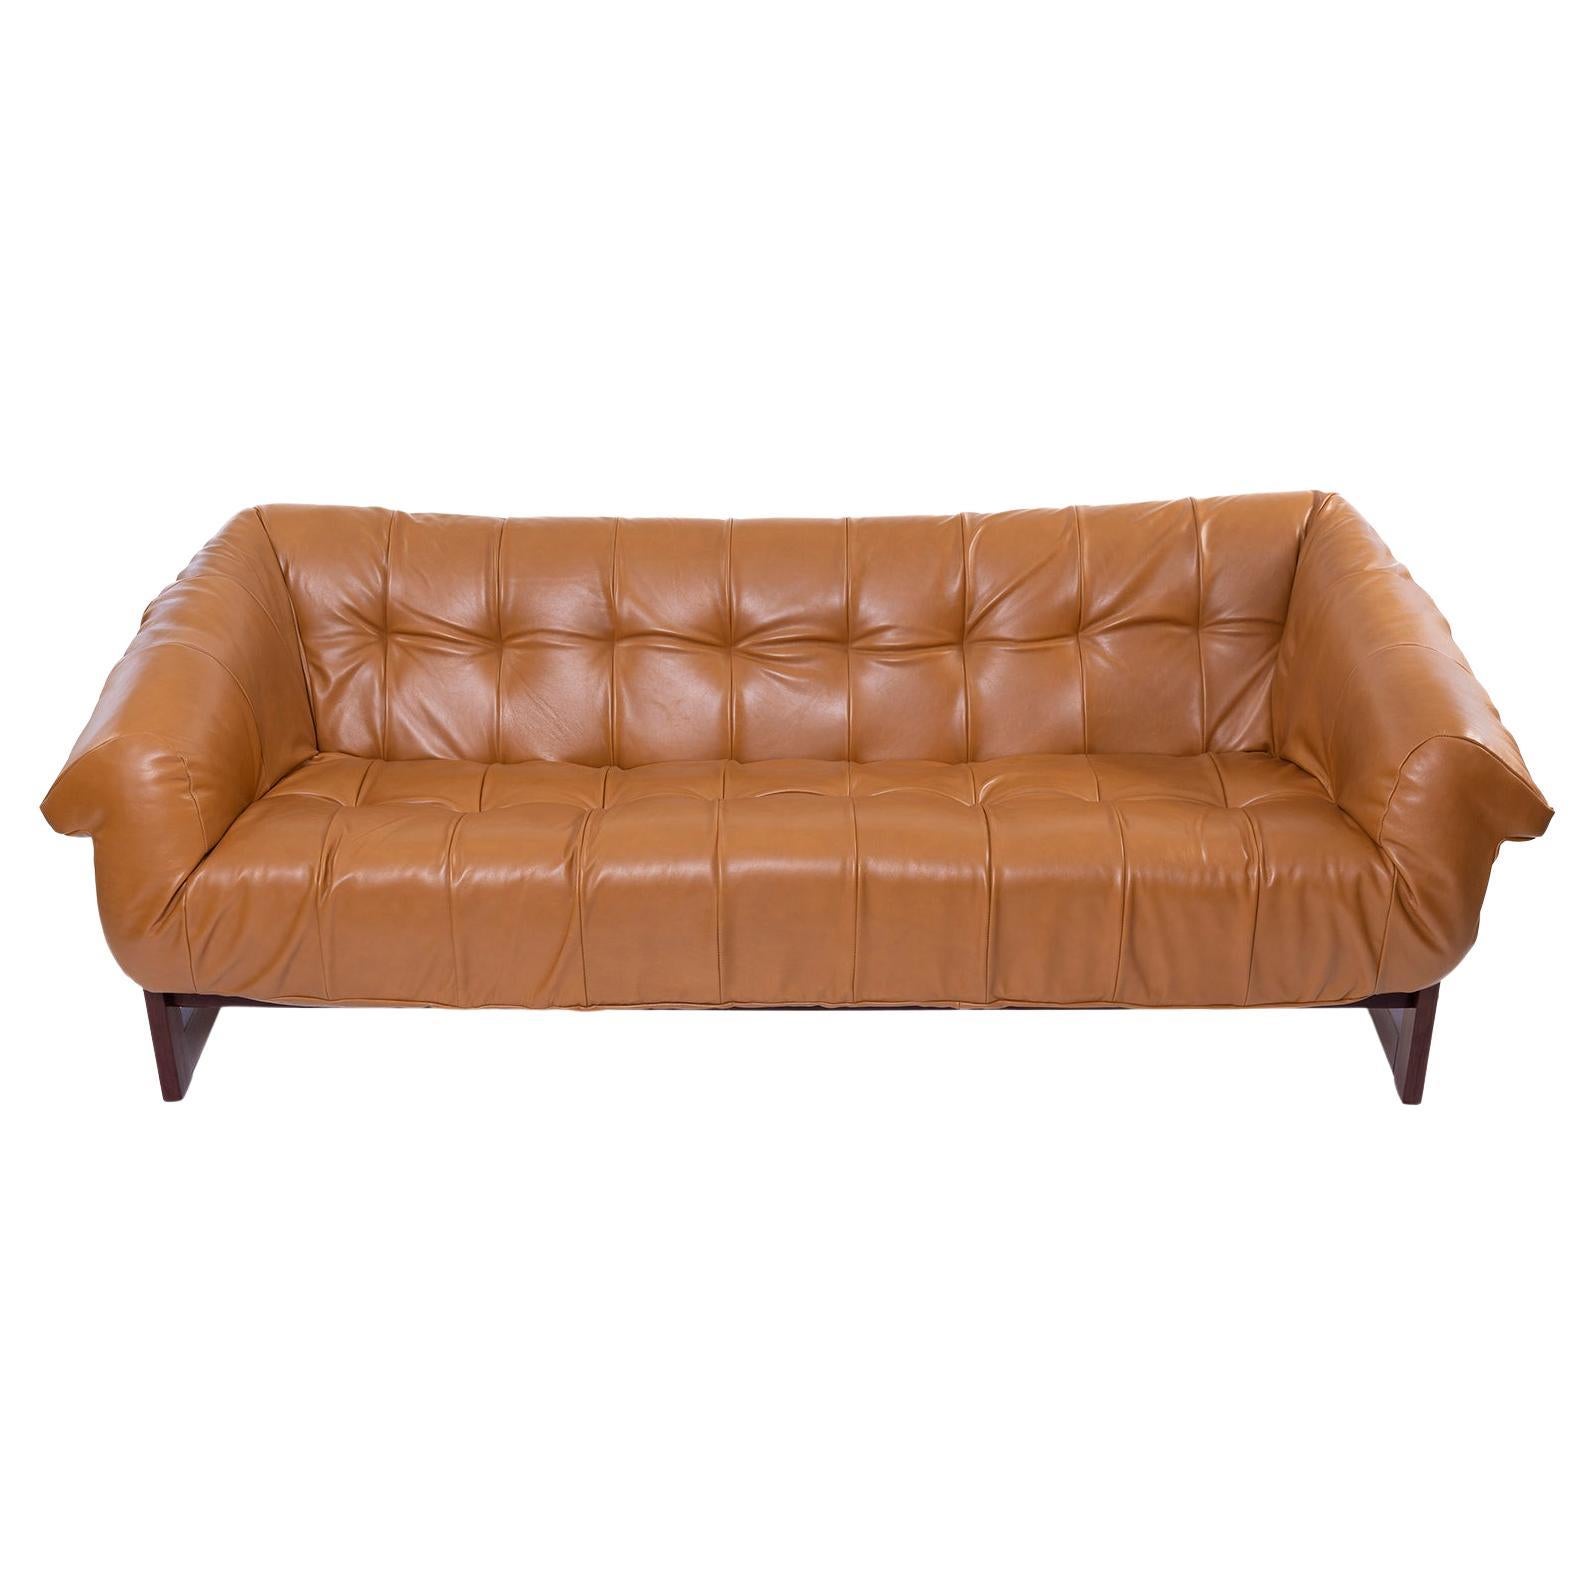 Percival Lafer Leather & Rosewood 1970's Sling Sofa